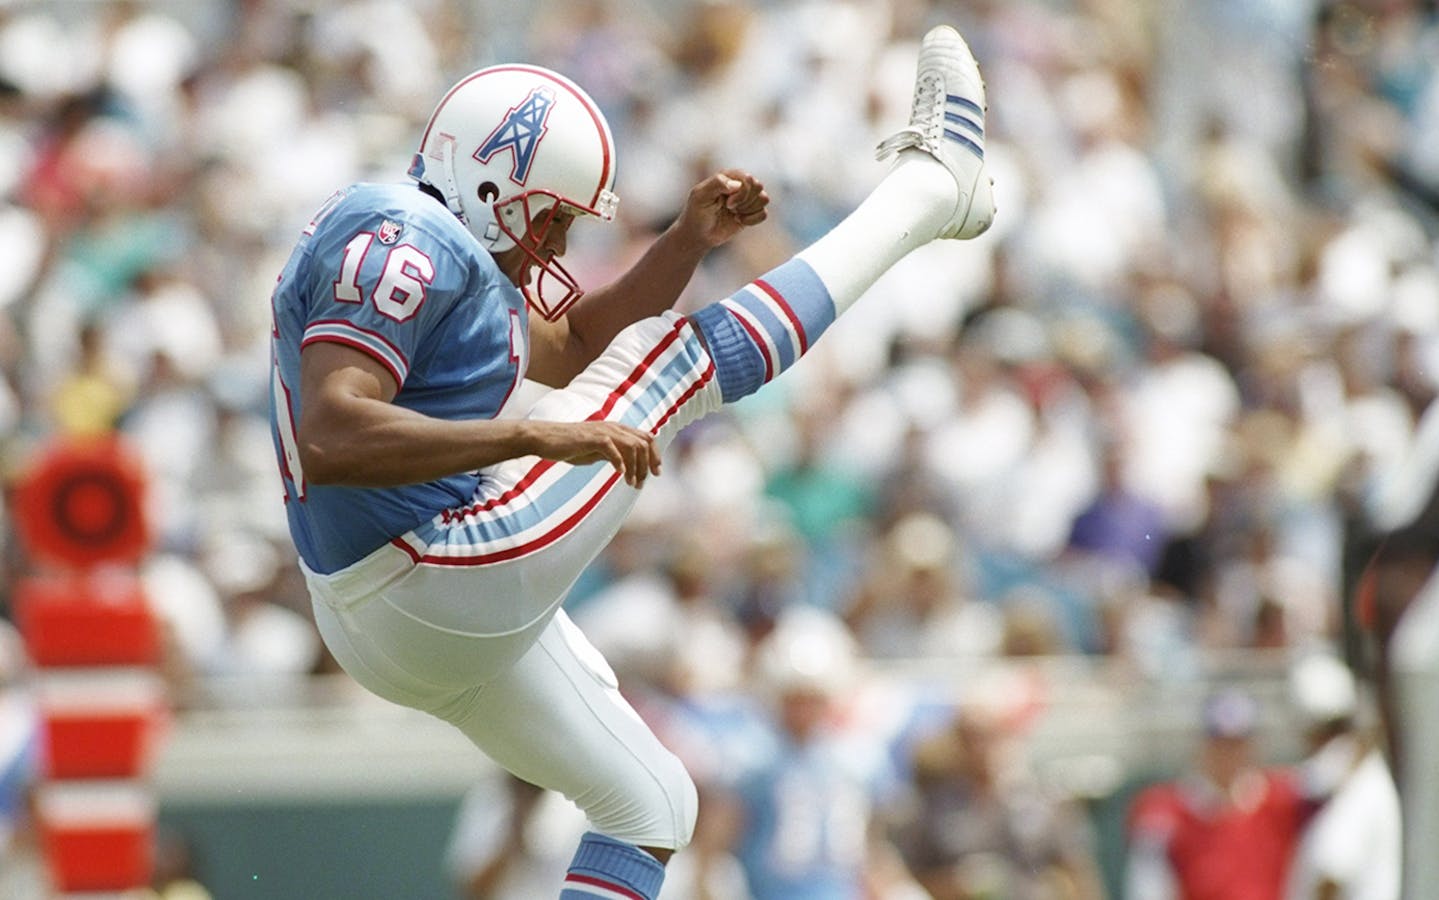 We should wear the Houston Oilers throwback jerseys for our next home game  vs. the Texans : r/Tennesseetitans